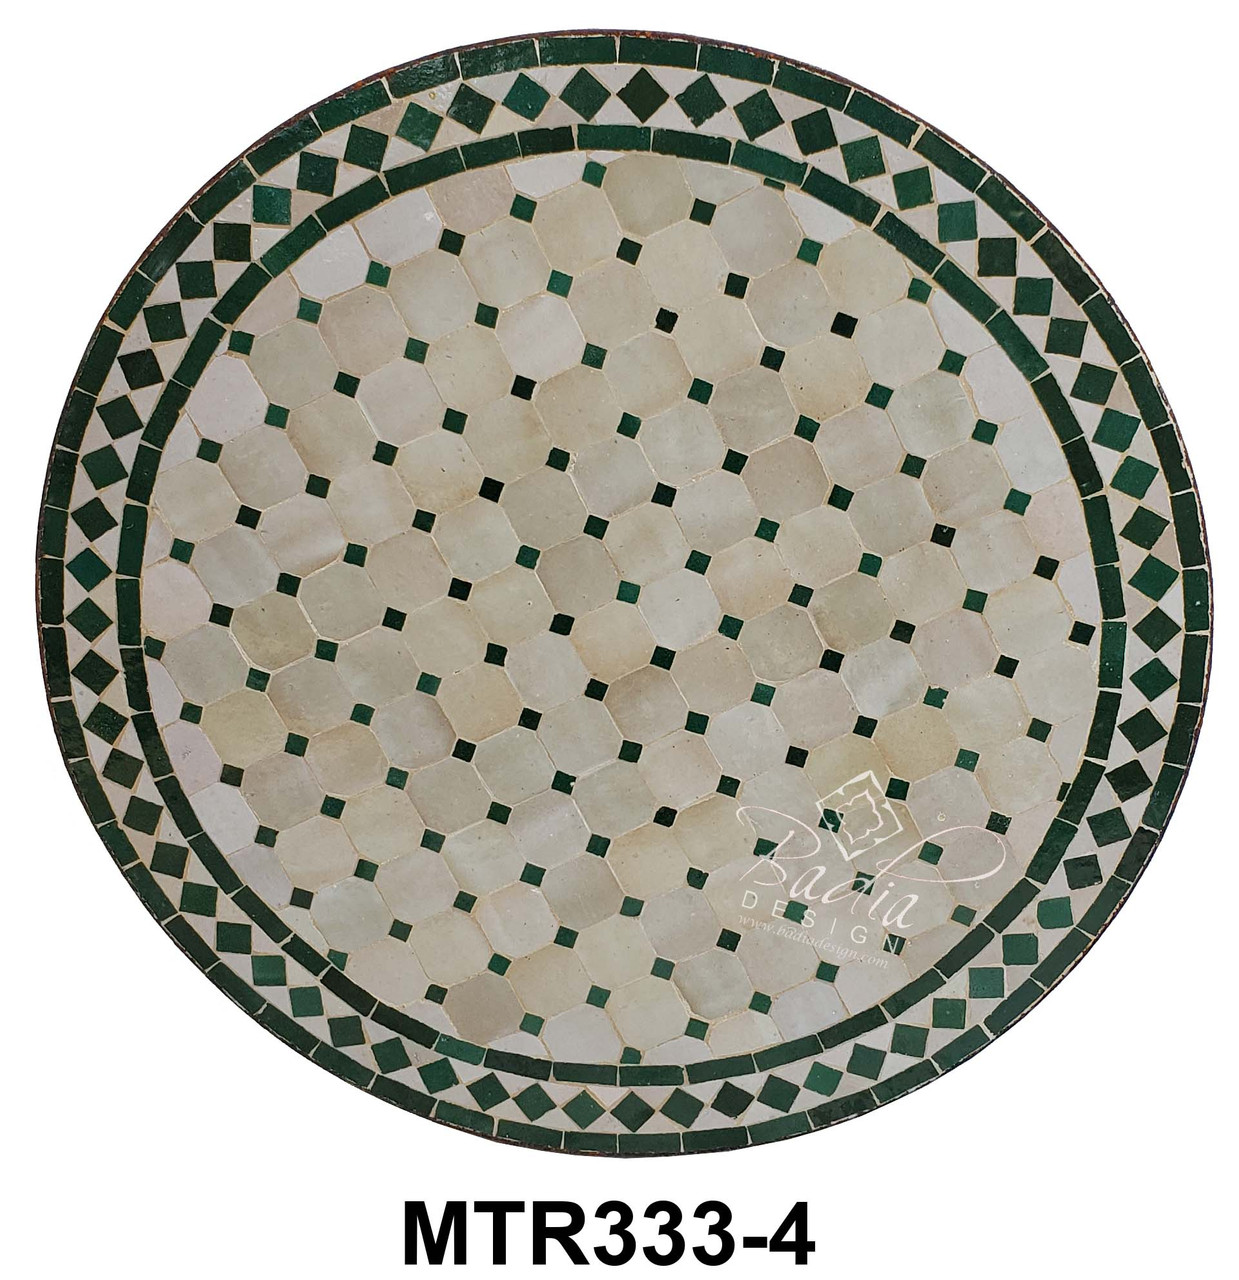 32 Inch Moroccan Mosaic Tile Table Top - MTR333